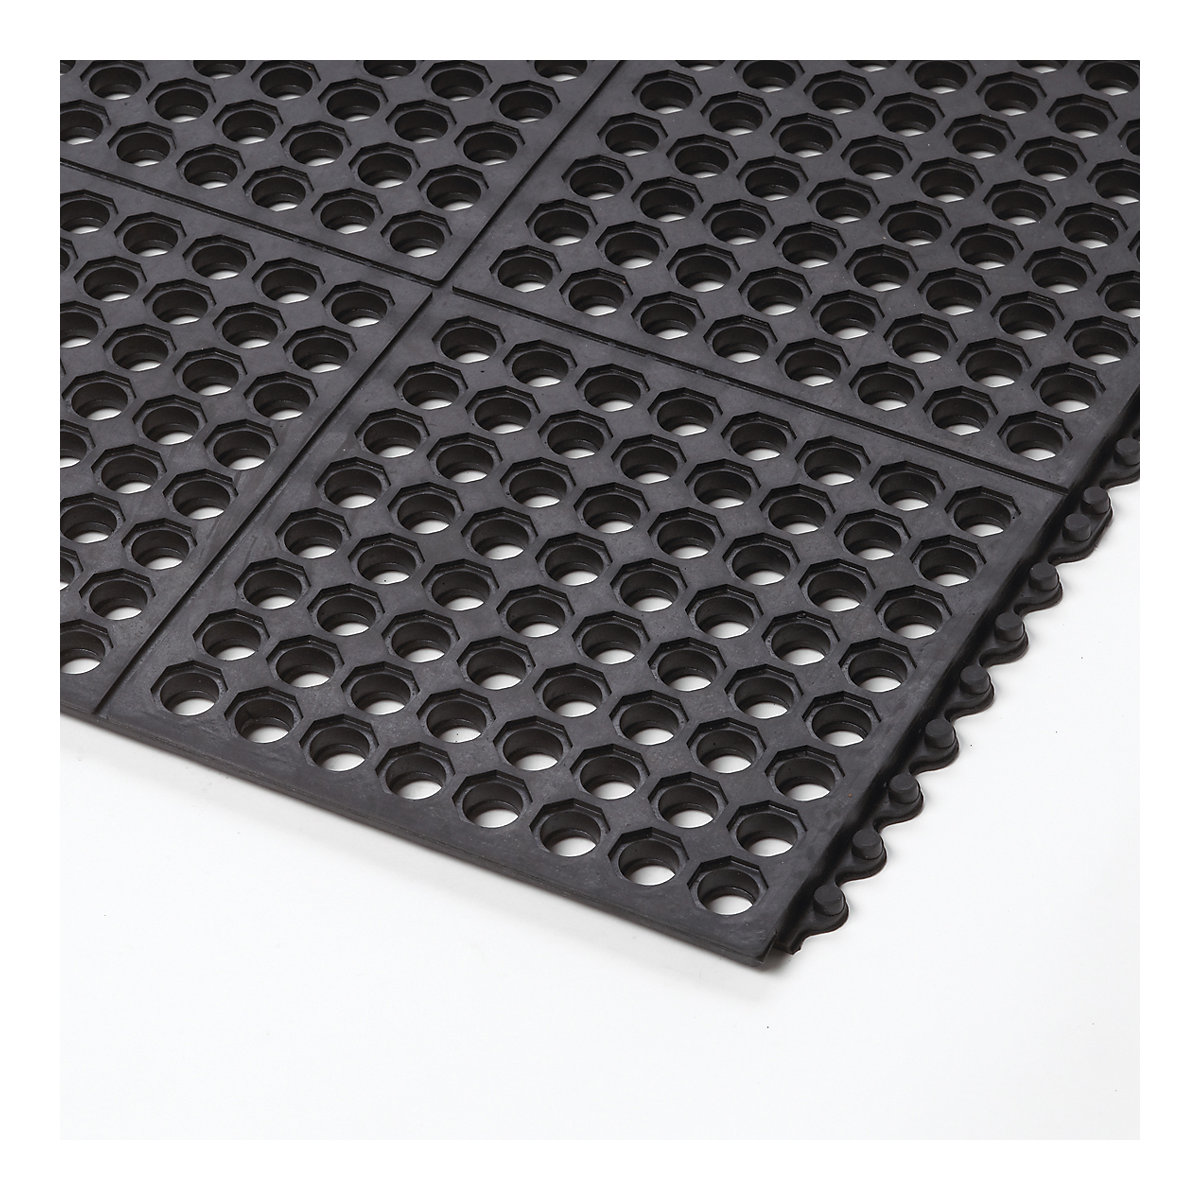 Cushion Ease™ perforated natural rubber plug-in system - NOTRAX